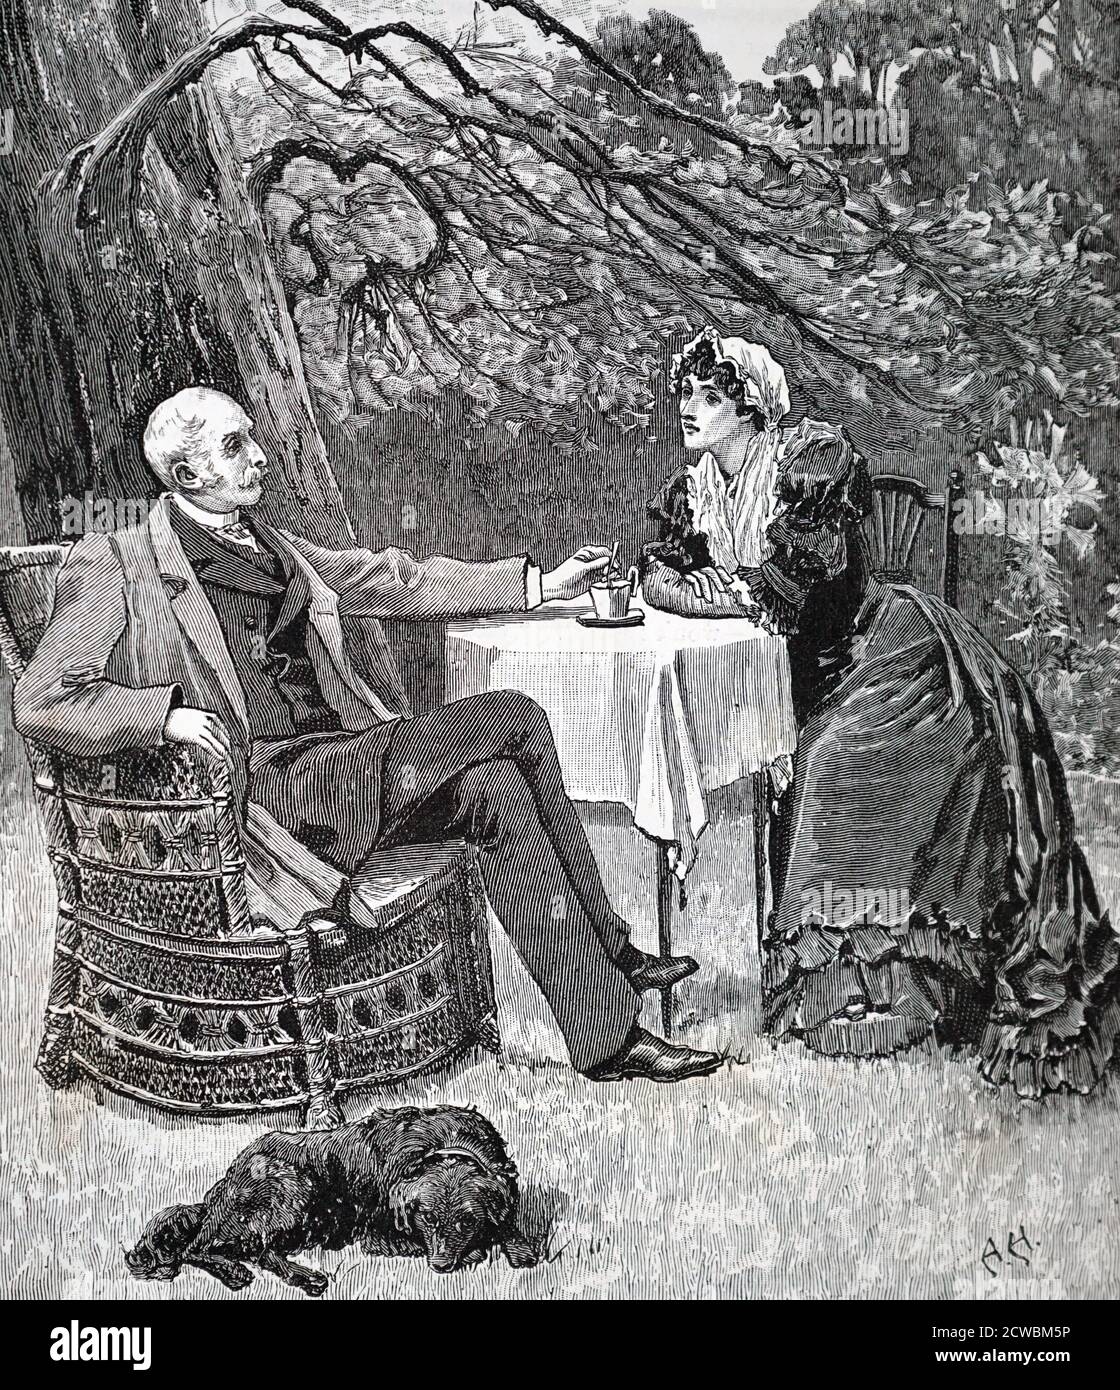 Engraving depicting an example of wicker furniture Stock Photo